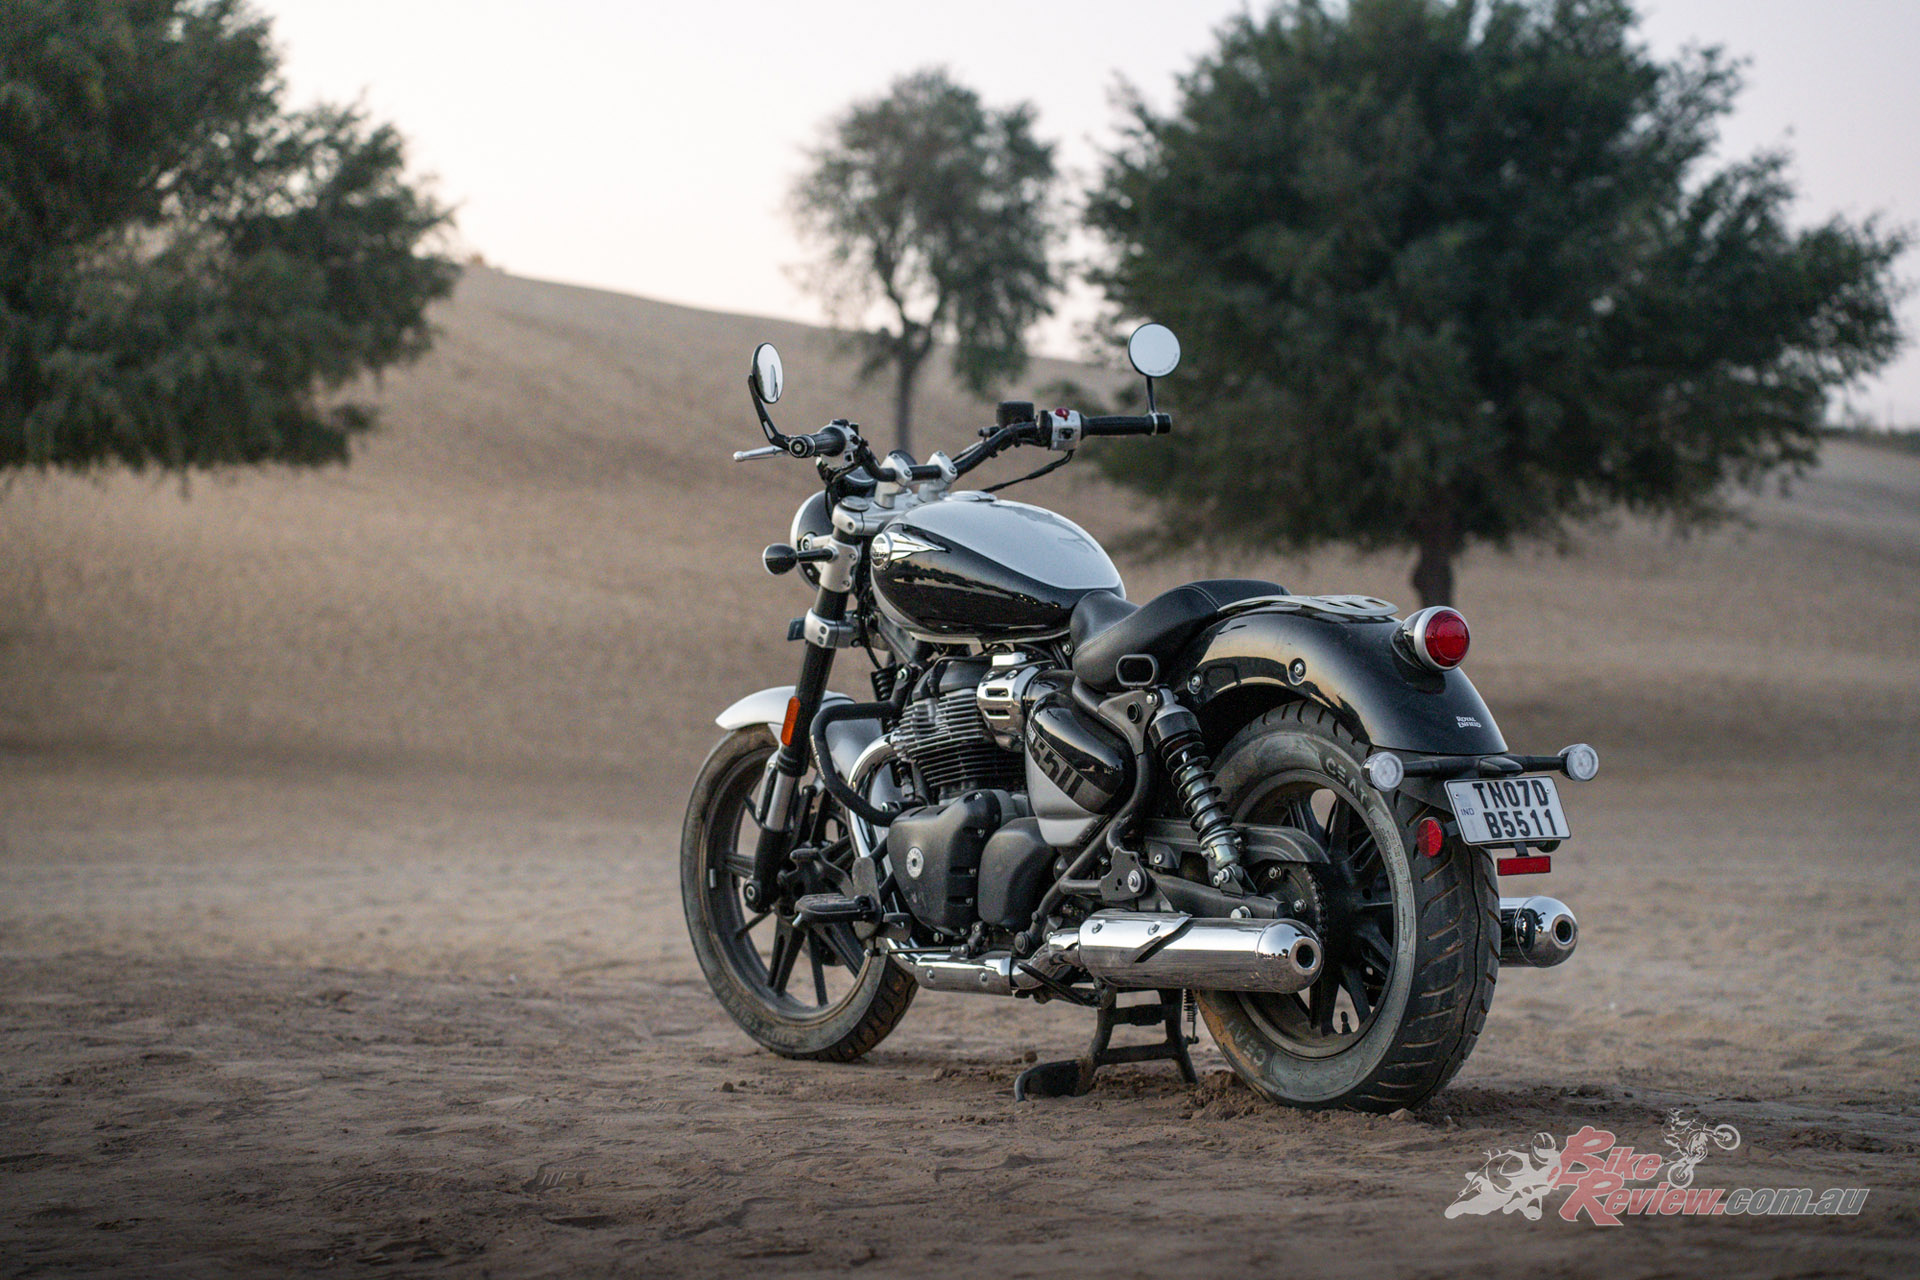 Typical of Royal Enfield, the Super Meteor 650 has plenty of different trims to suit a wide range of aesthetic preferences. 